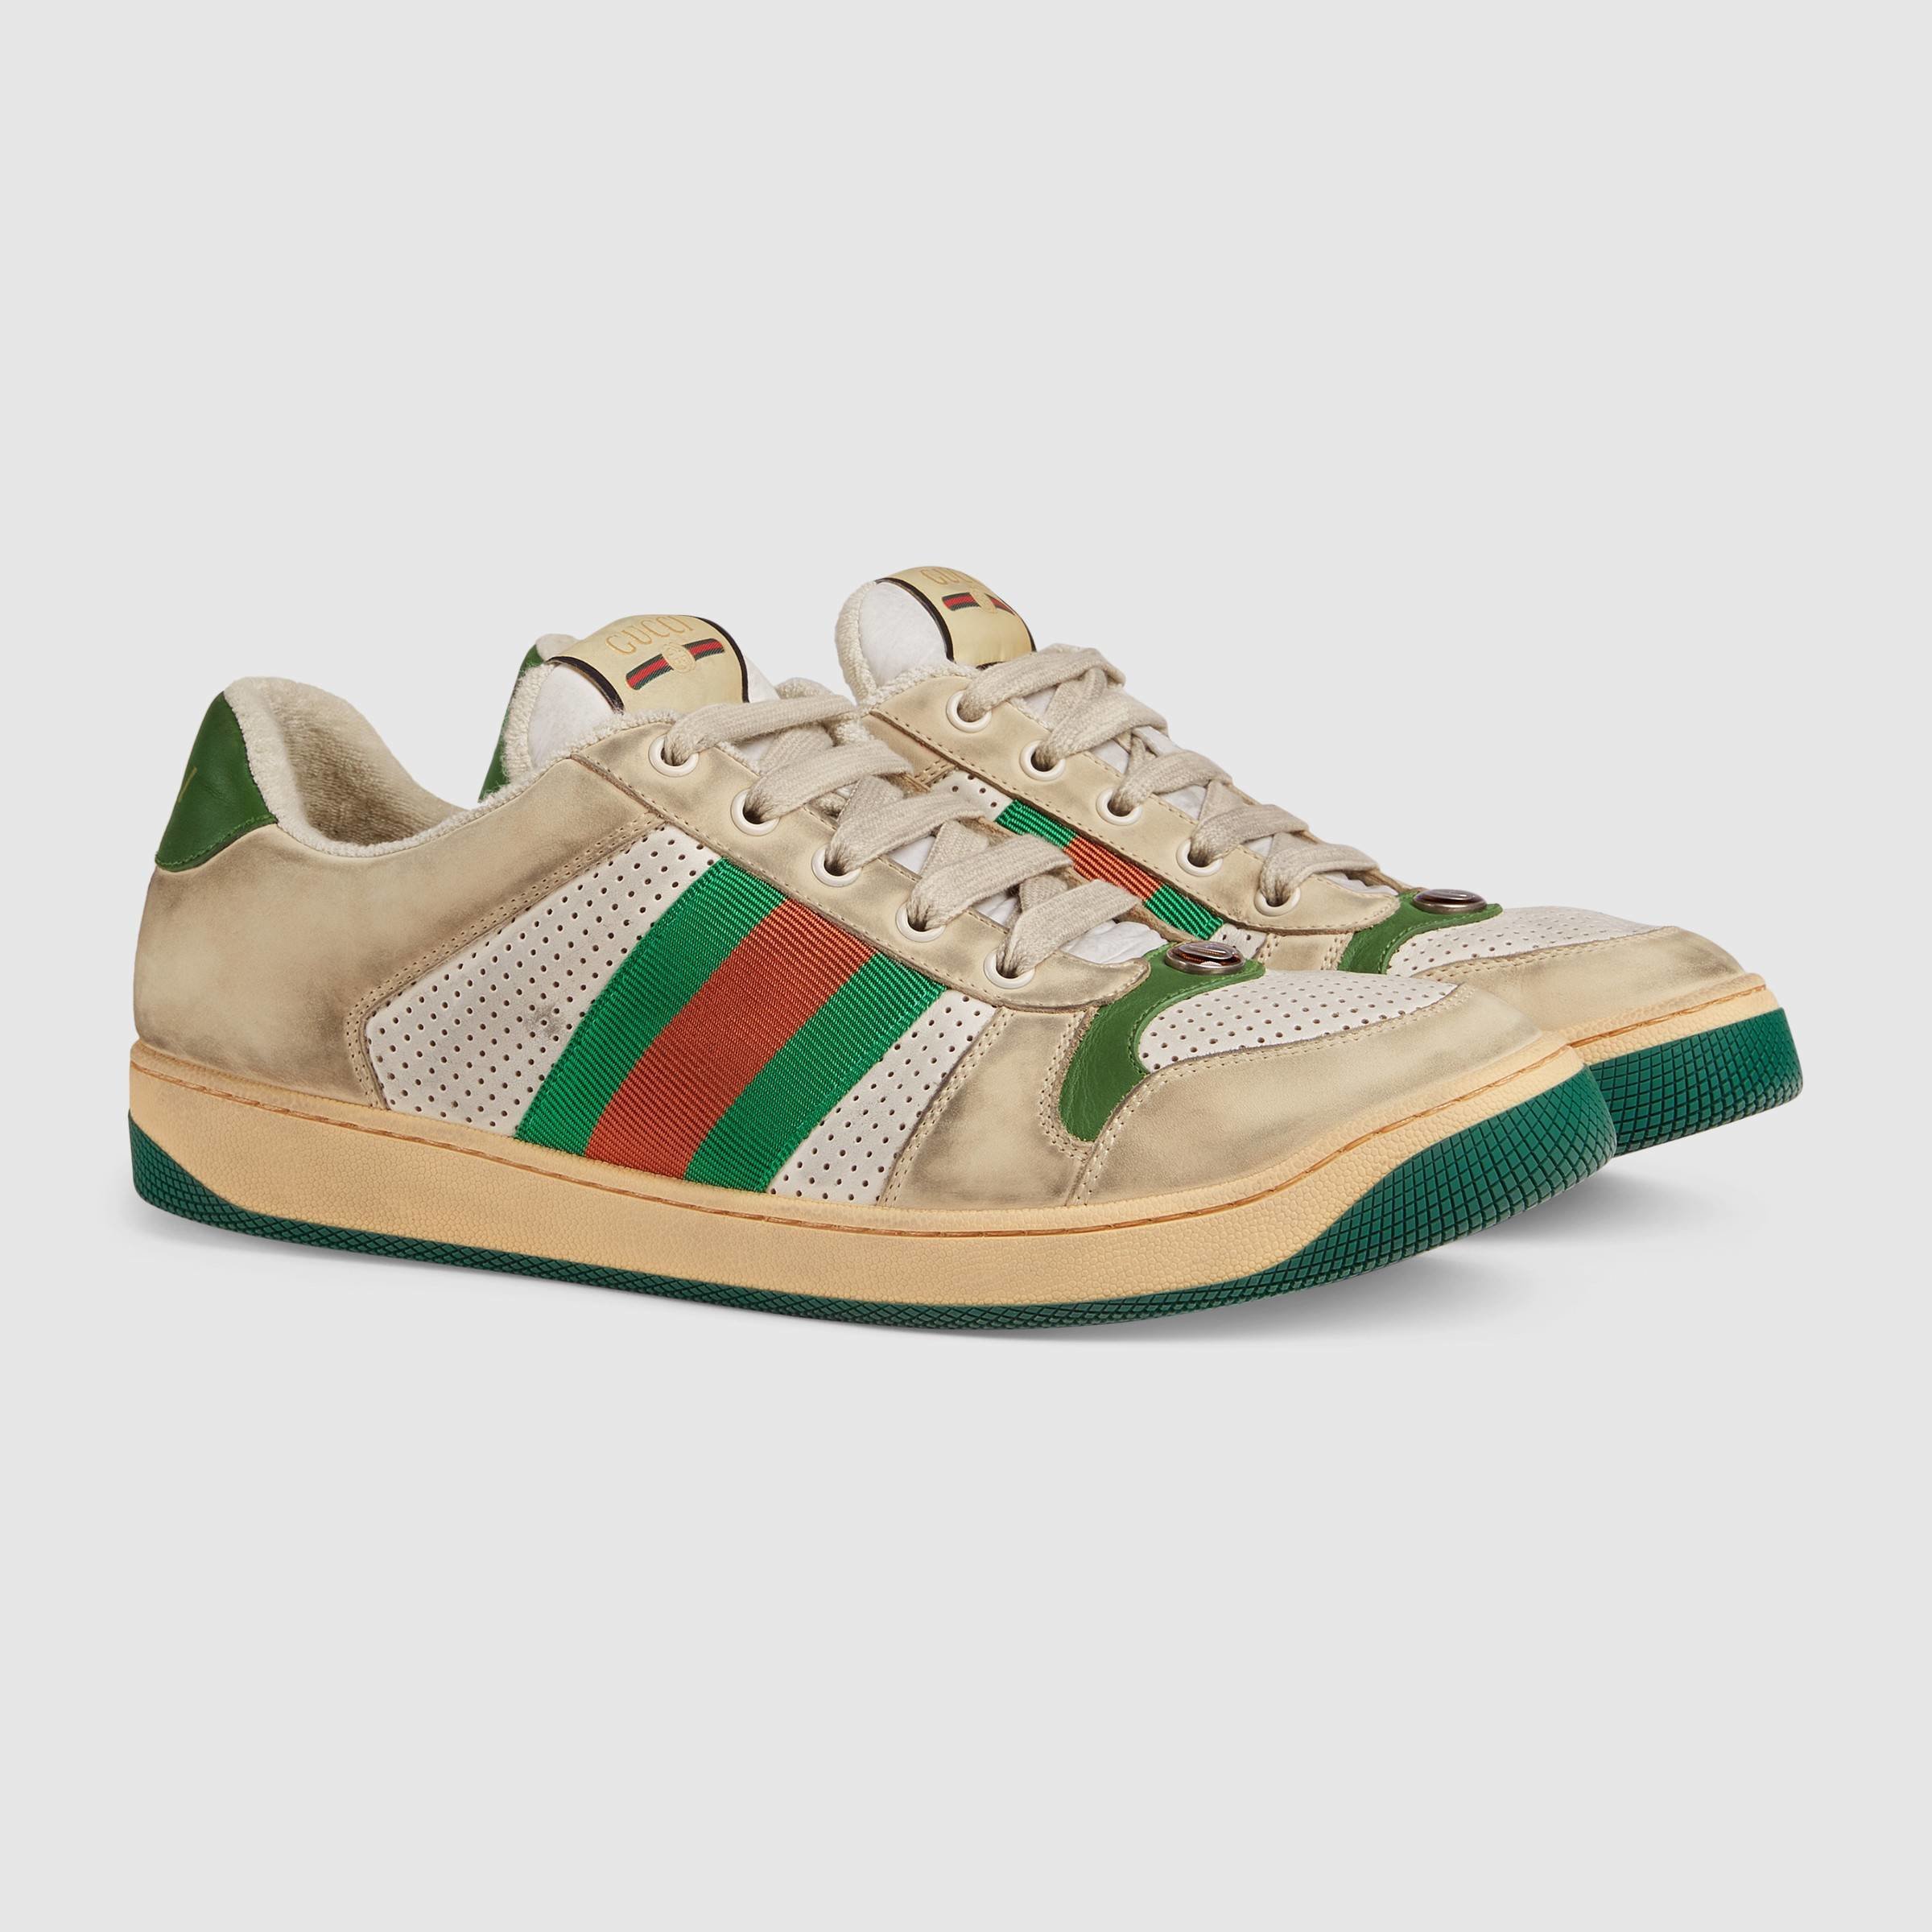 gucci shoes that look like adidas